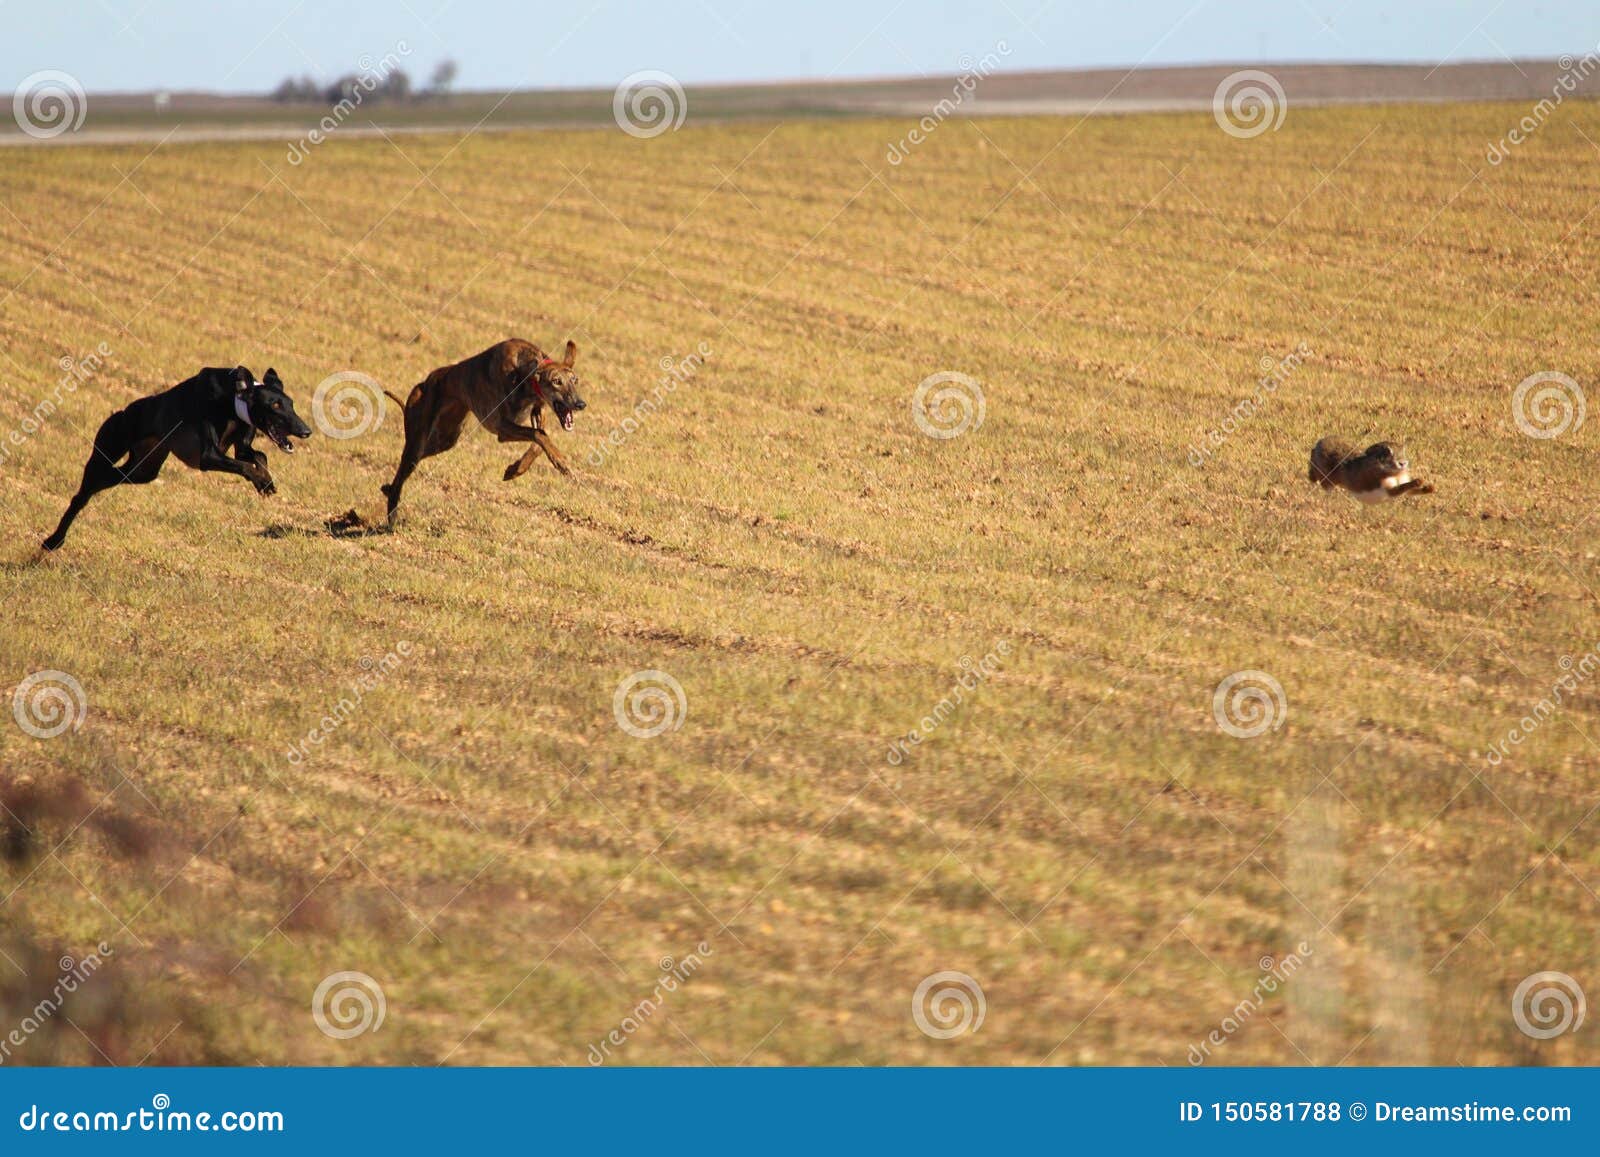 typical spanish dog ready to run behind the hares